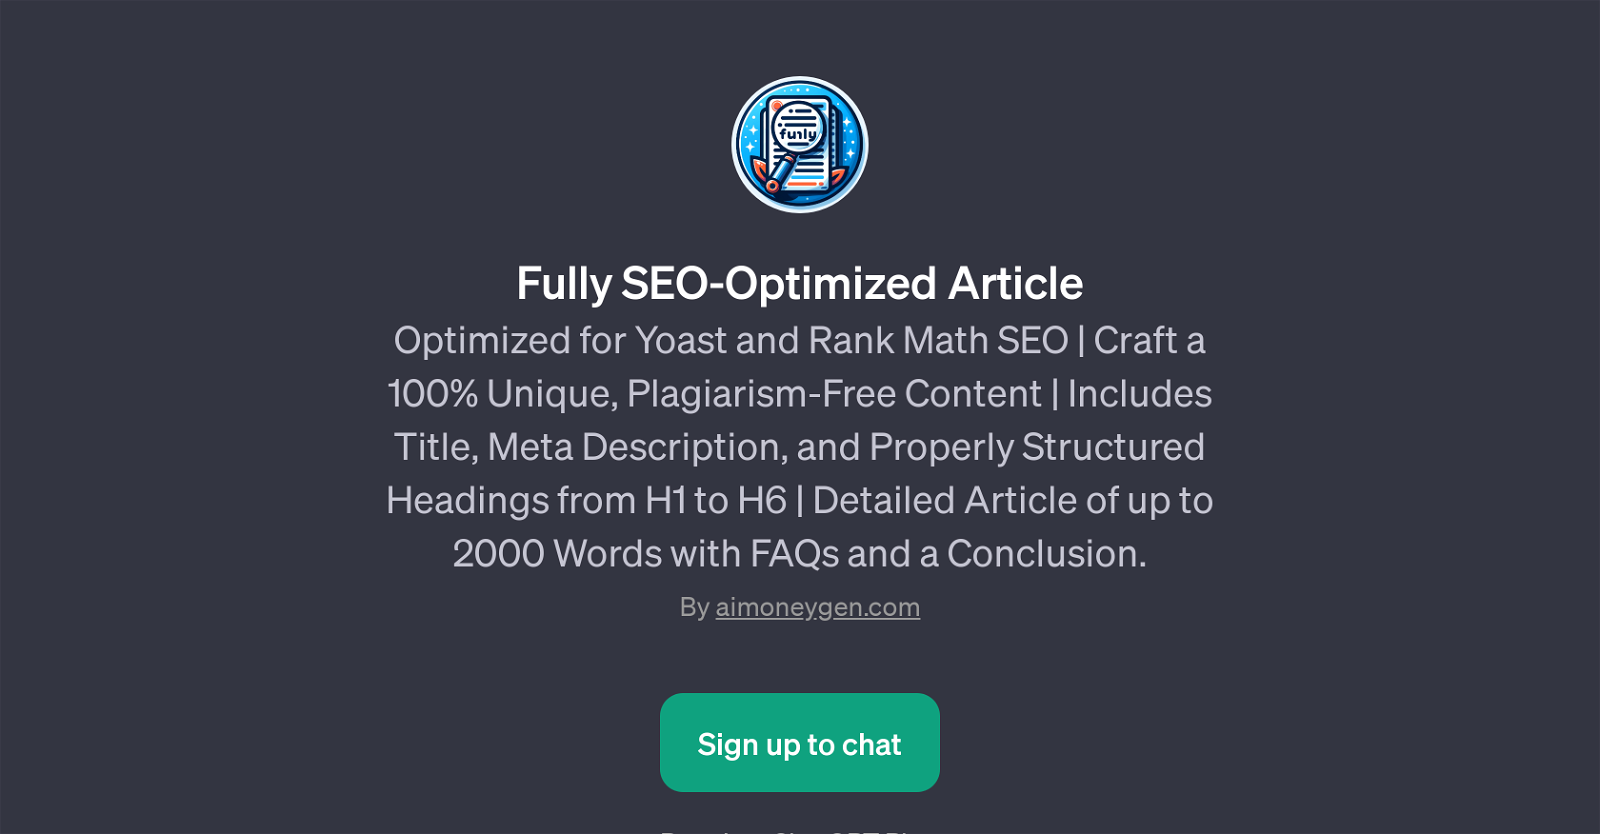 Fully SEO-Optimized Article website